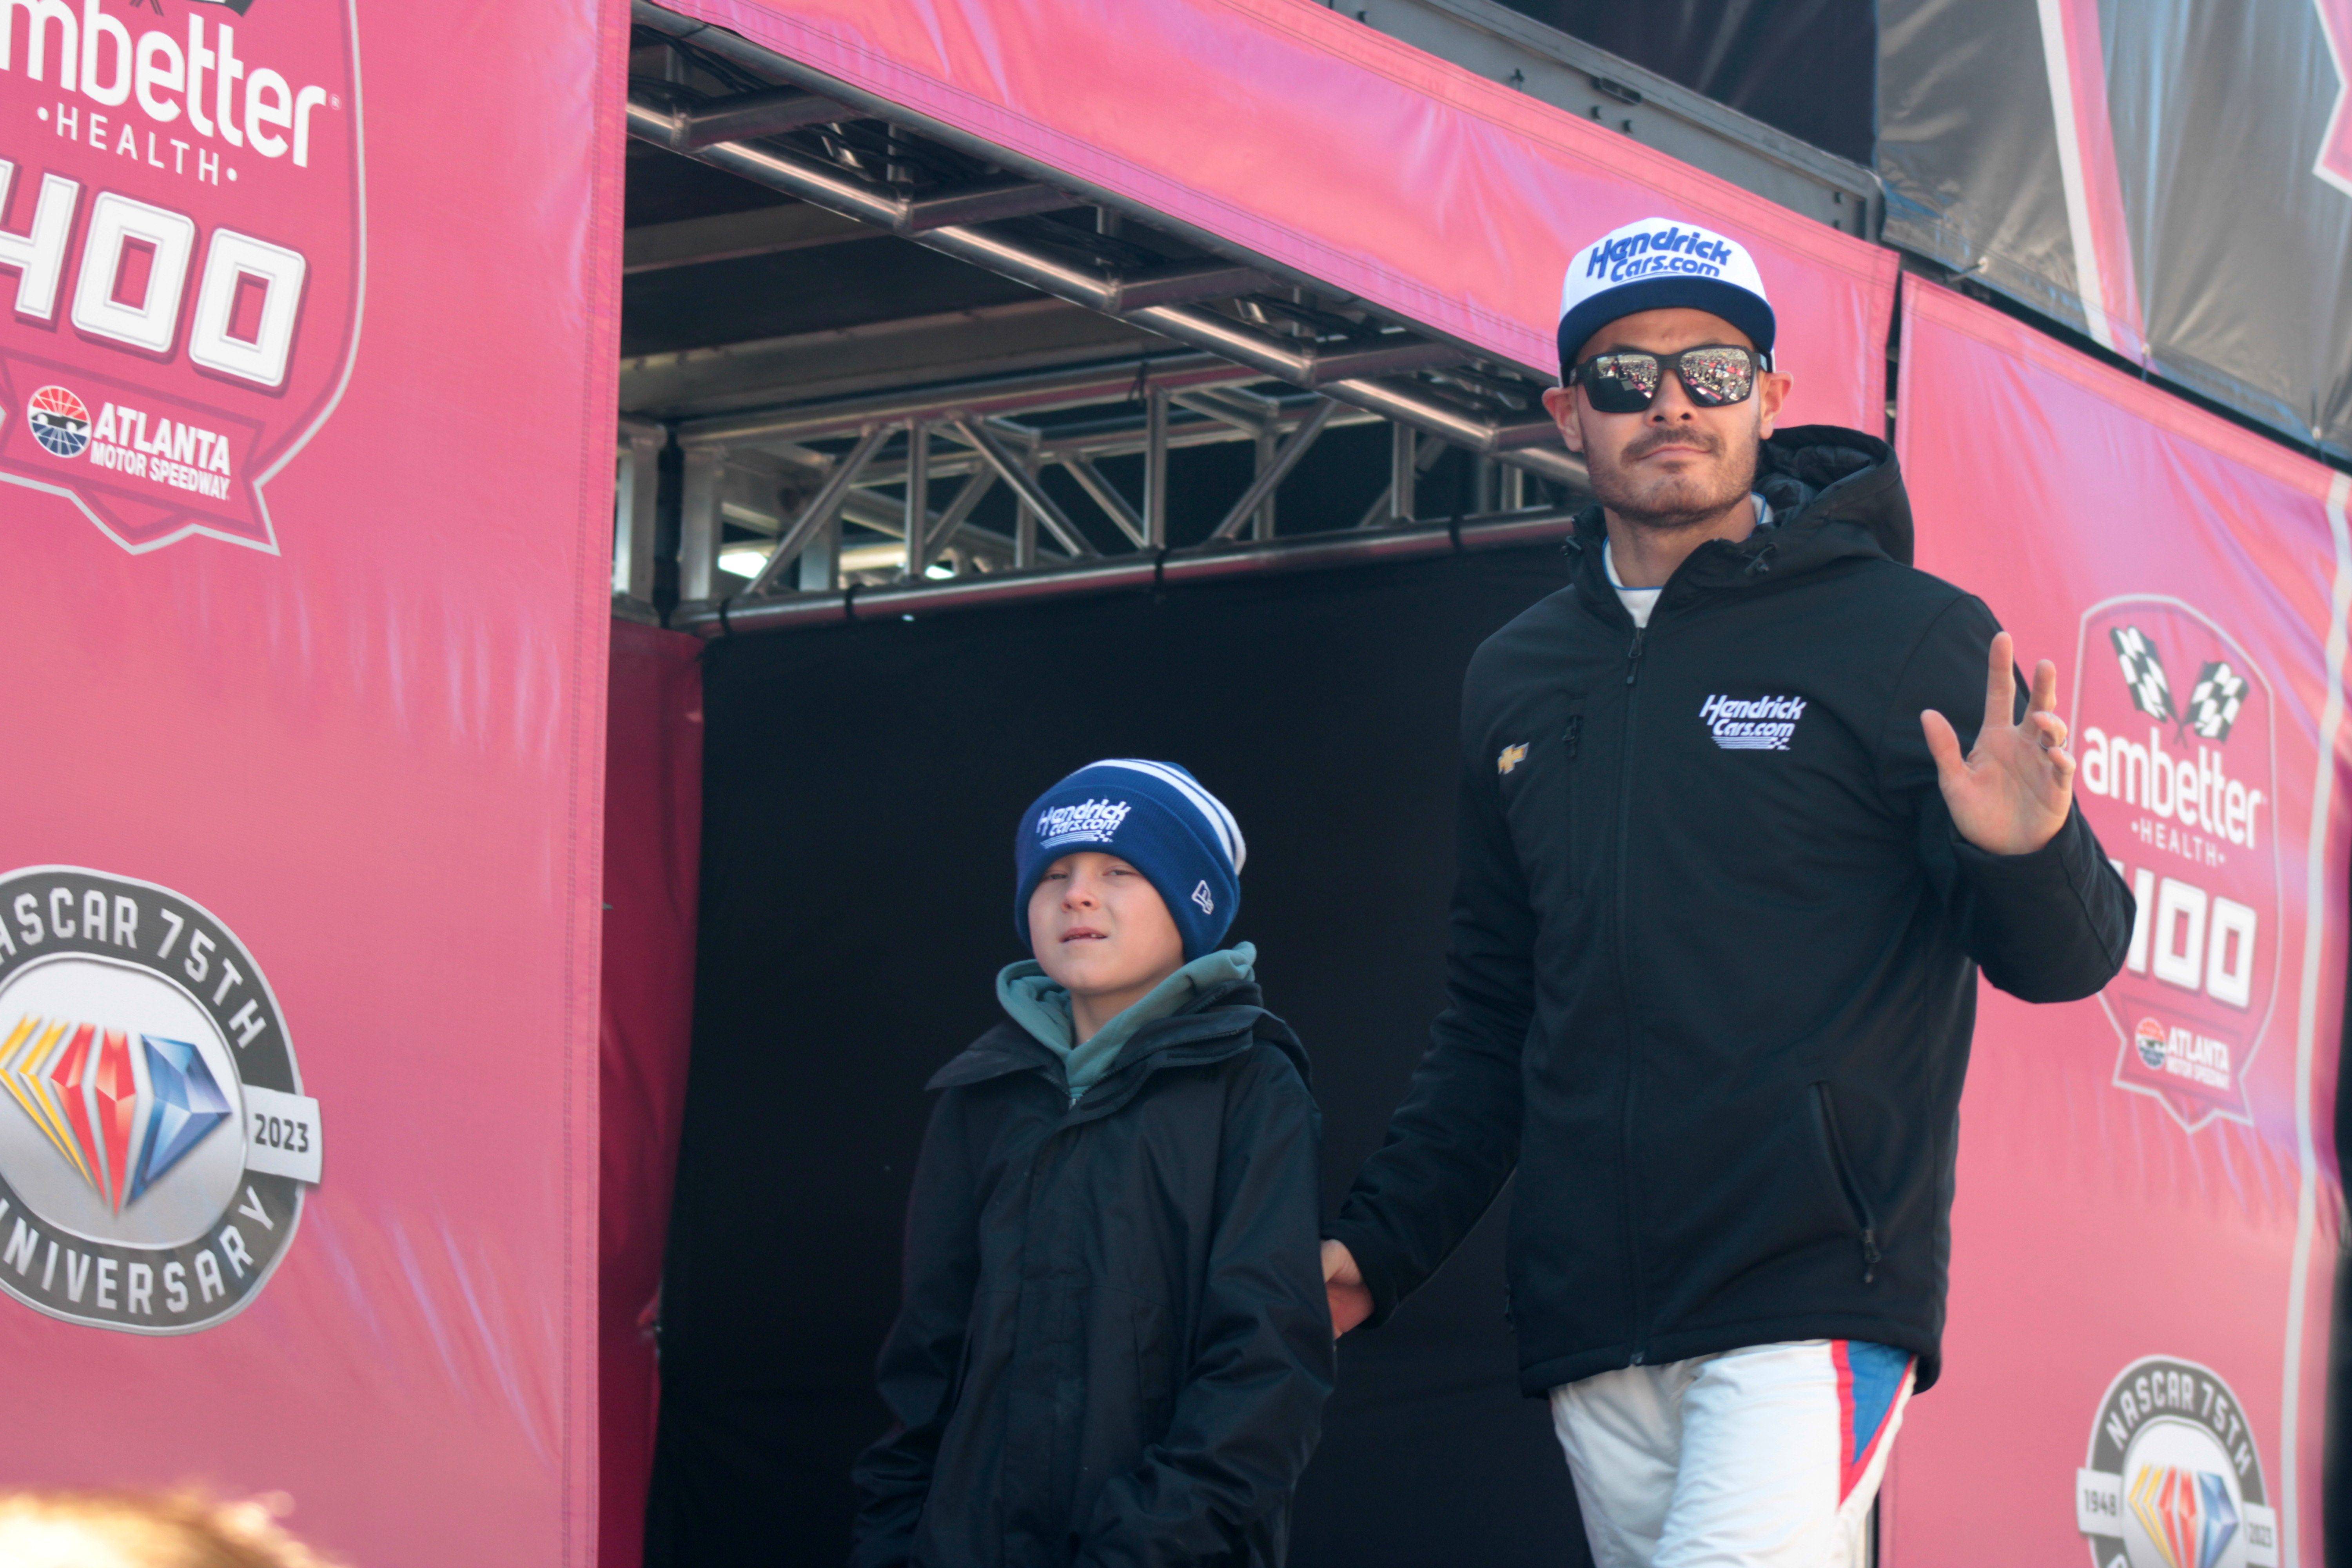 Larson cherishes time well spent with his son, Owen, wherever they go. (Photo: Trish McCormack | The Podium Finish)